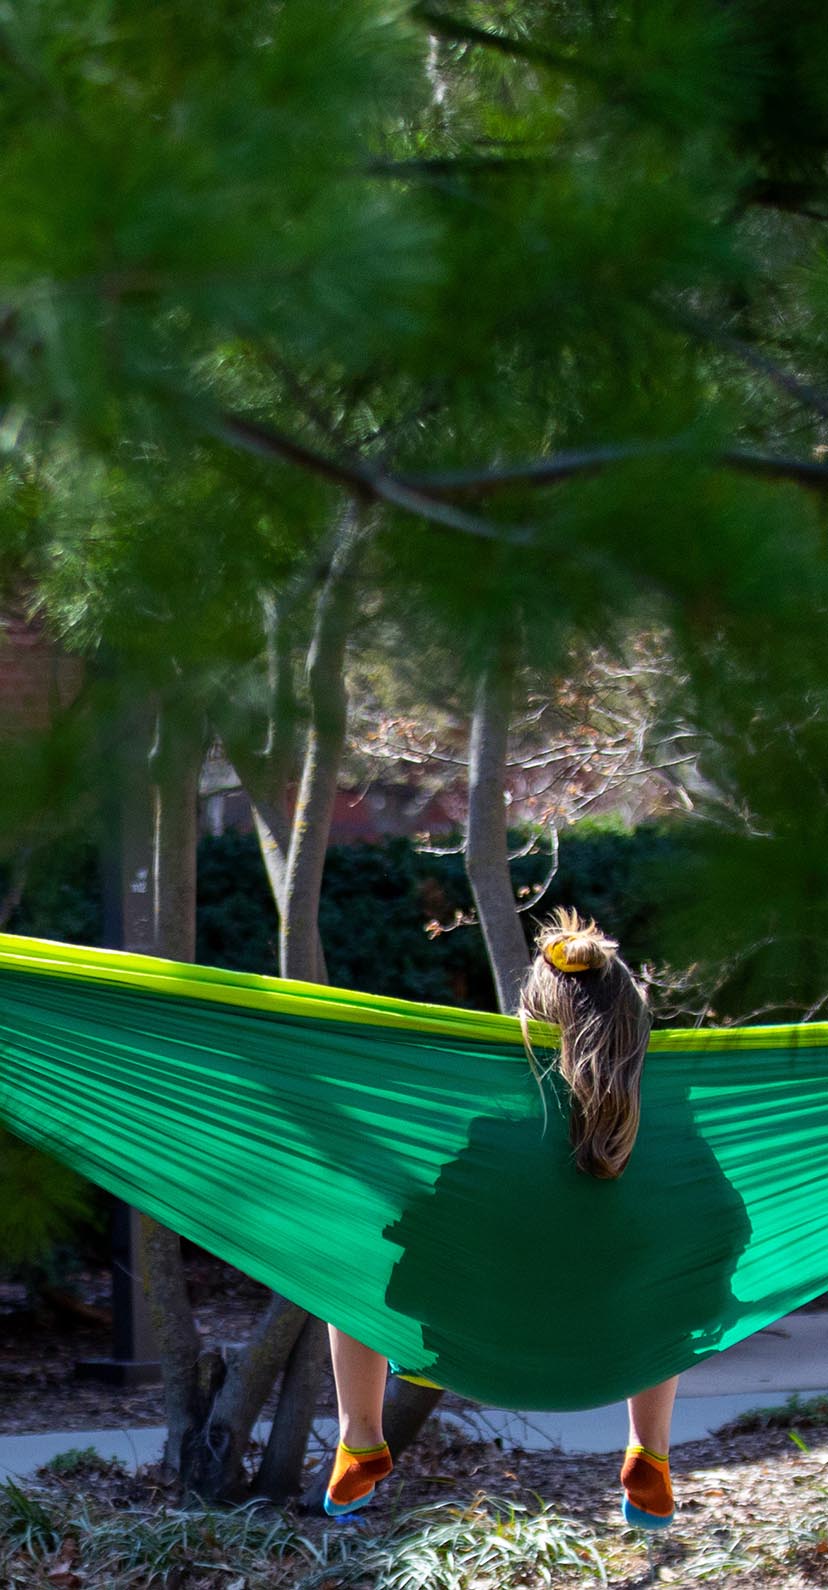 A student hammocking on a sunny day.